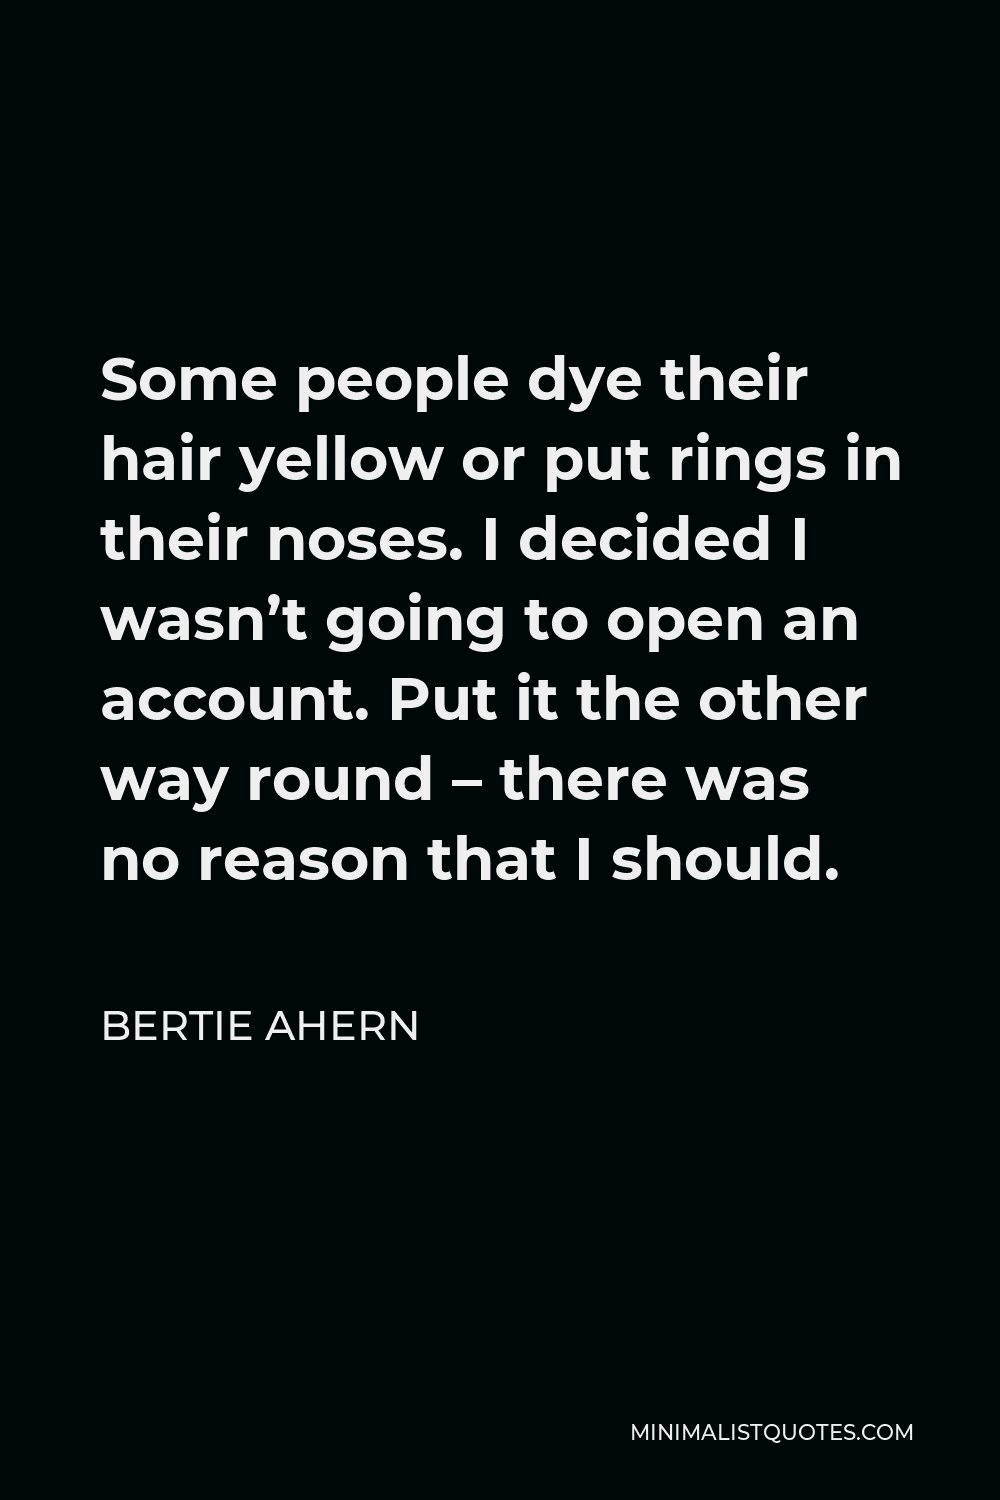 Bertie Ahern Quote - Some people dye their hair yellow or put rings in their noses. I decided I wasn’t going to open an account. Put it the other way round – there was no reason that I should.